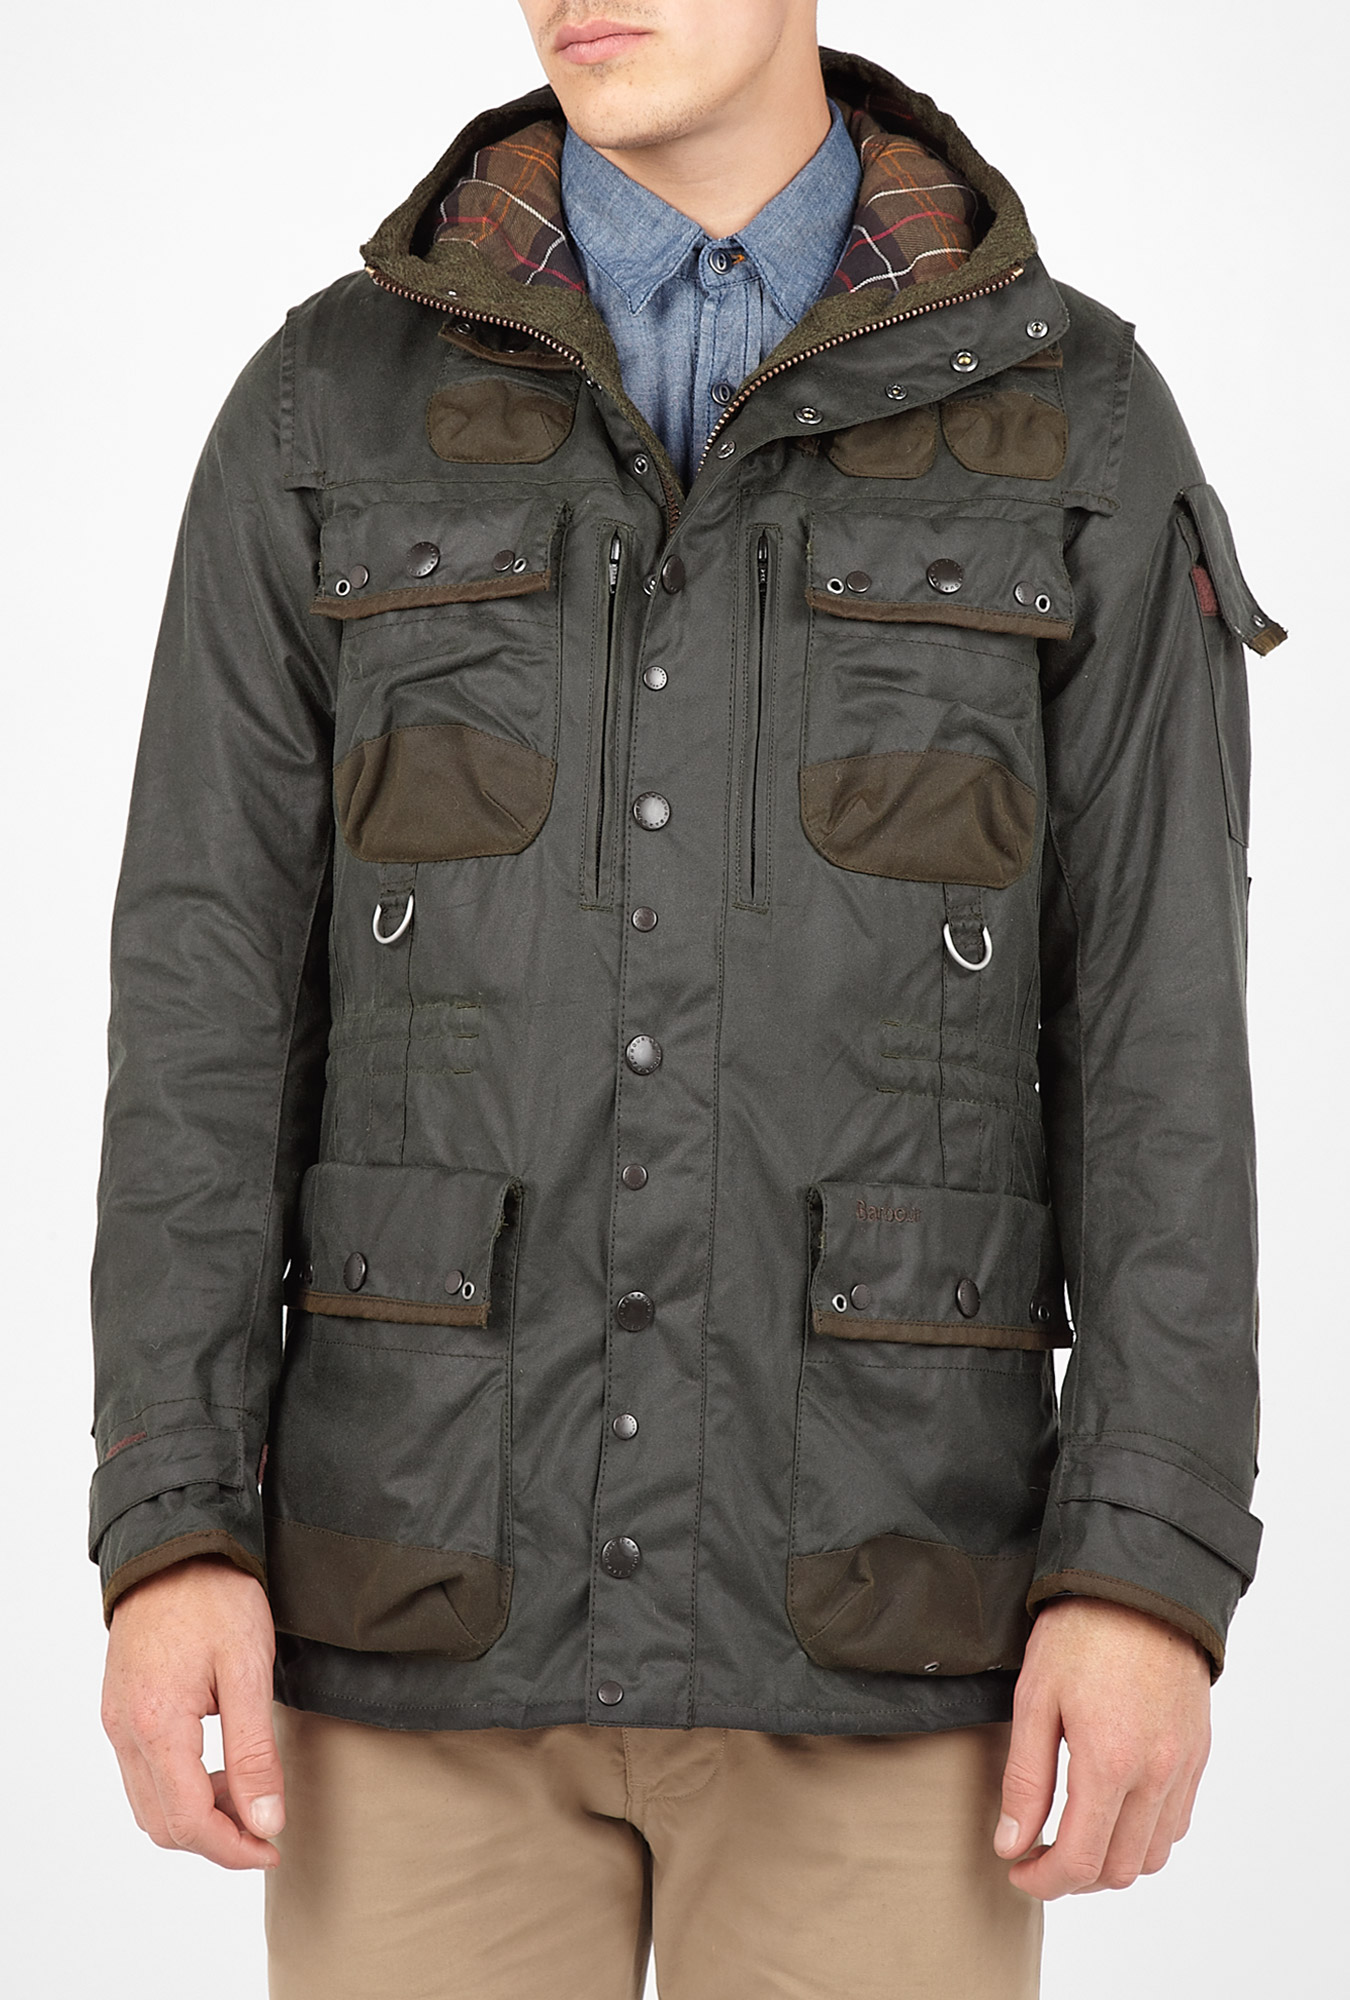 Barbour To Ki To Sage Green Waxed Multi Pocket Military Jacket in Green ...